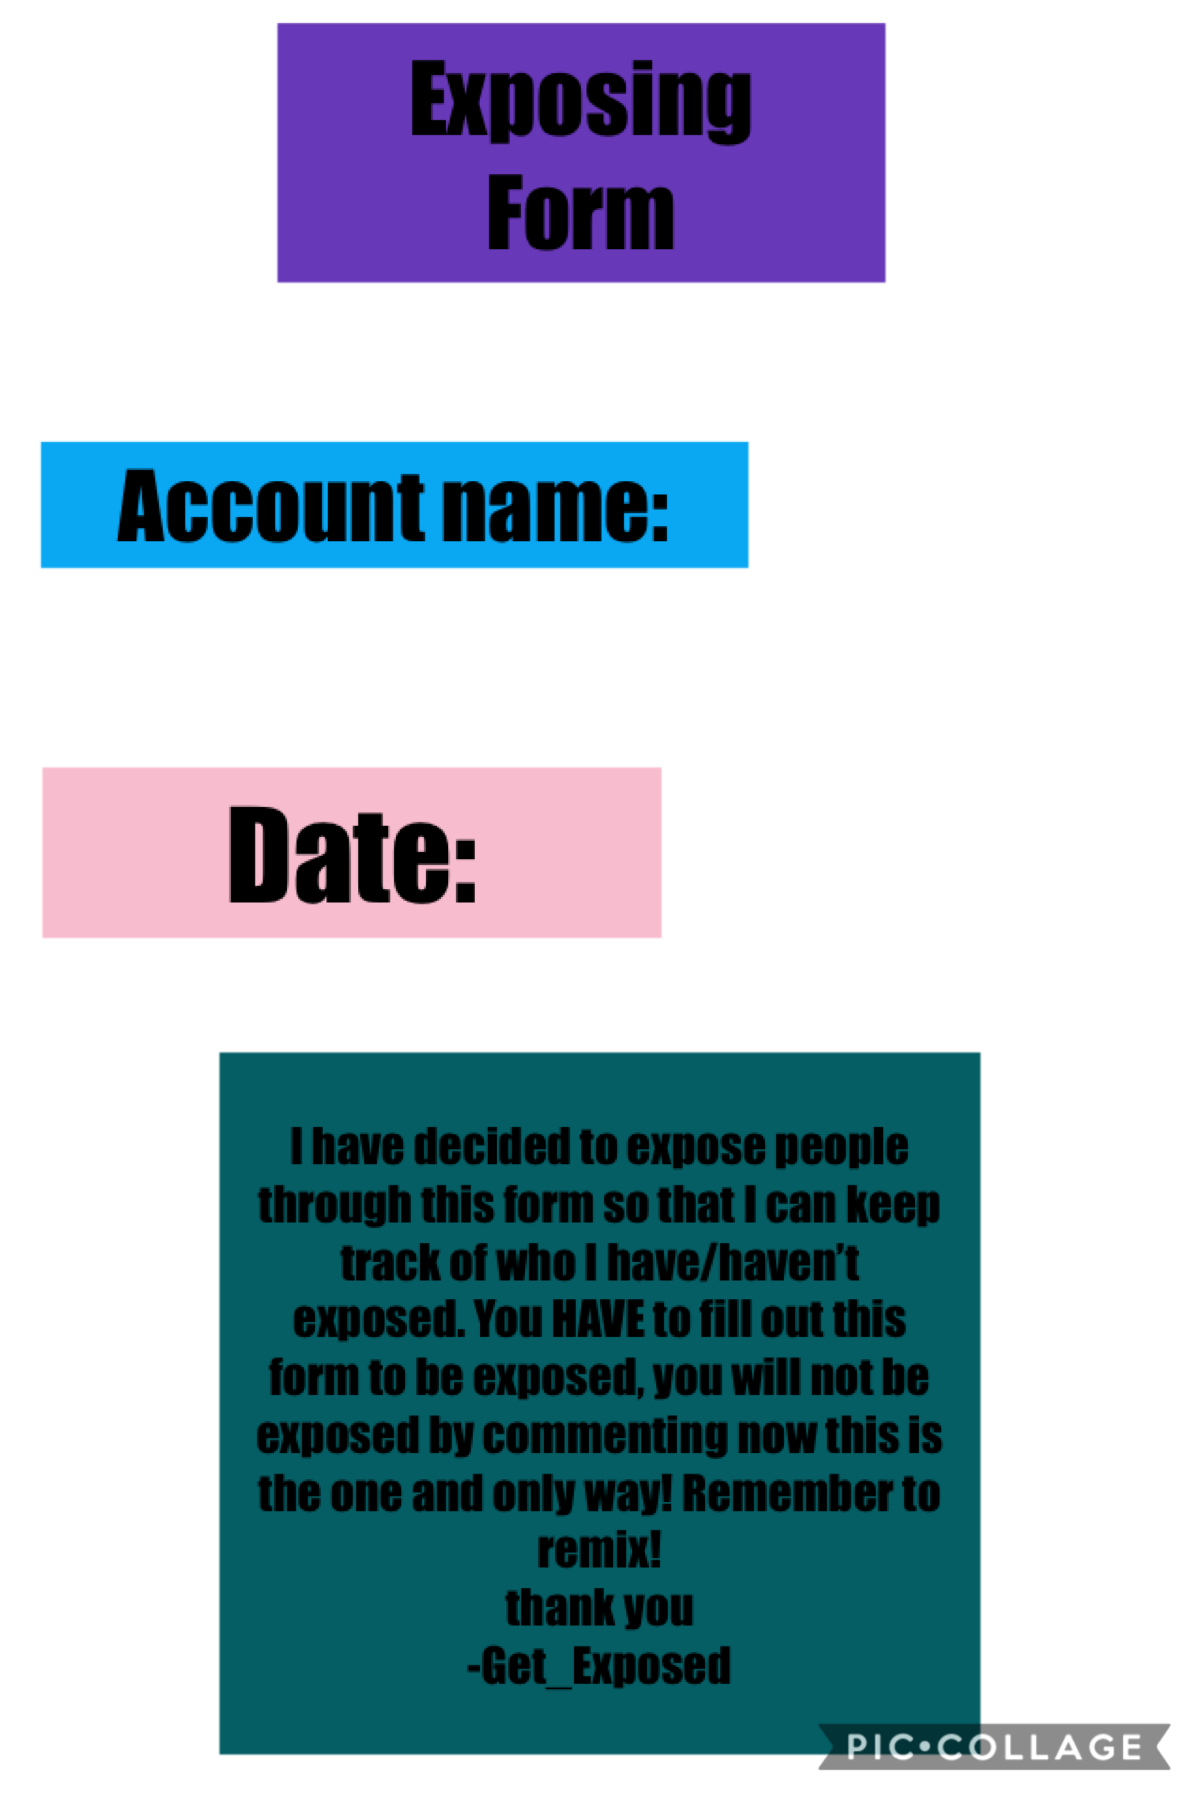 New way to be exposed

Please fill this out if you would like to be exposed. I will no longer be exposing people that ask to be exposed through the comments because I do not want to confuse myself with you I’ve have/haven’t exposed. When you remix this I 